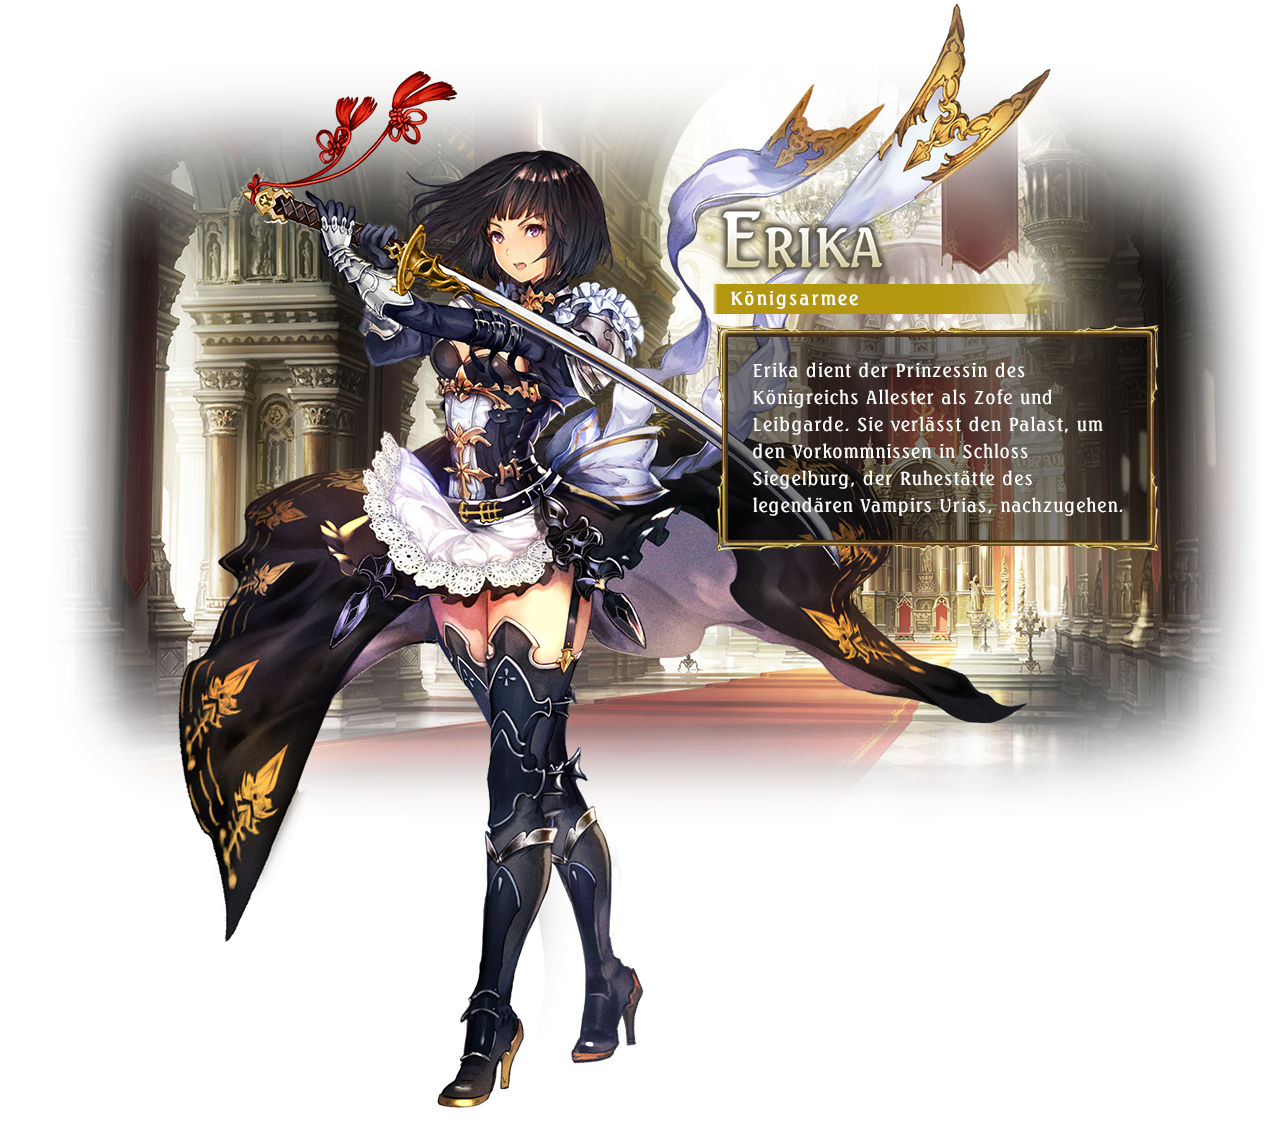 Erika / Class: Swordcraft / Erika is the sword-wielding protector to the princess. She left the castle to investigate an infamous vampire's final resting place.